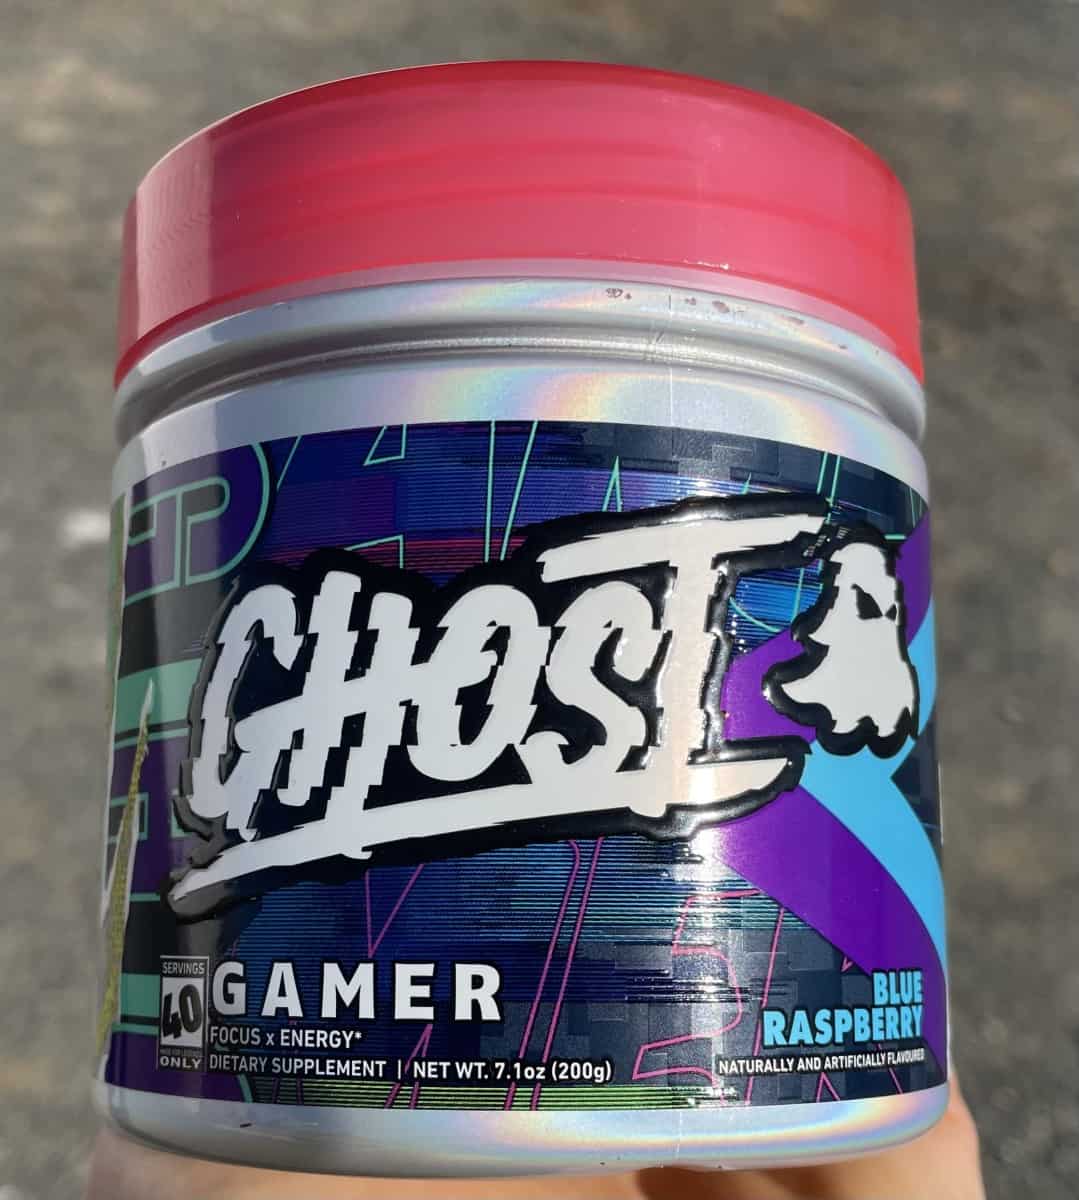 An image of Ghost Gamer Energy powder drink.